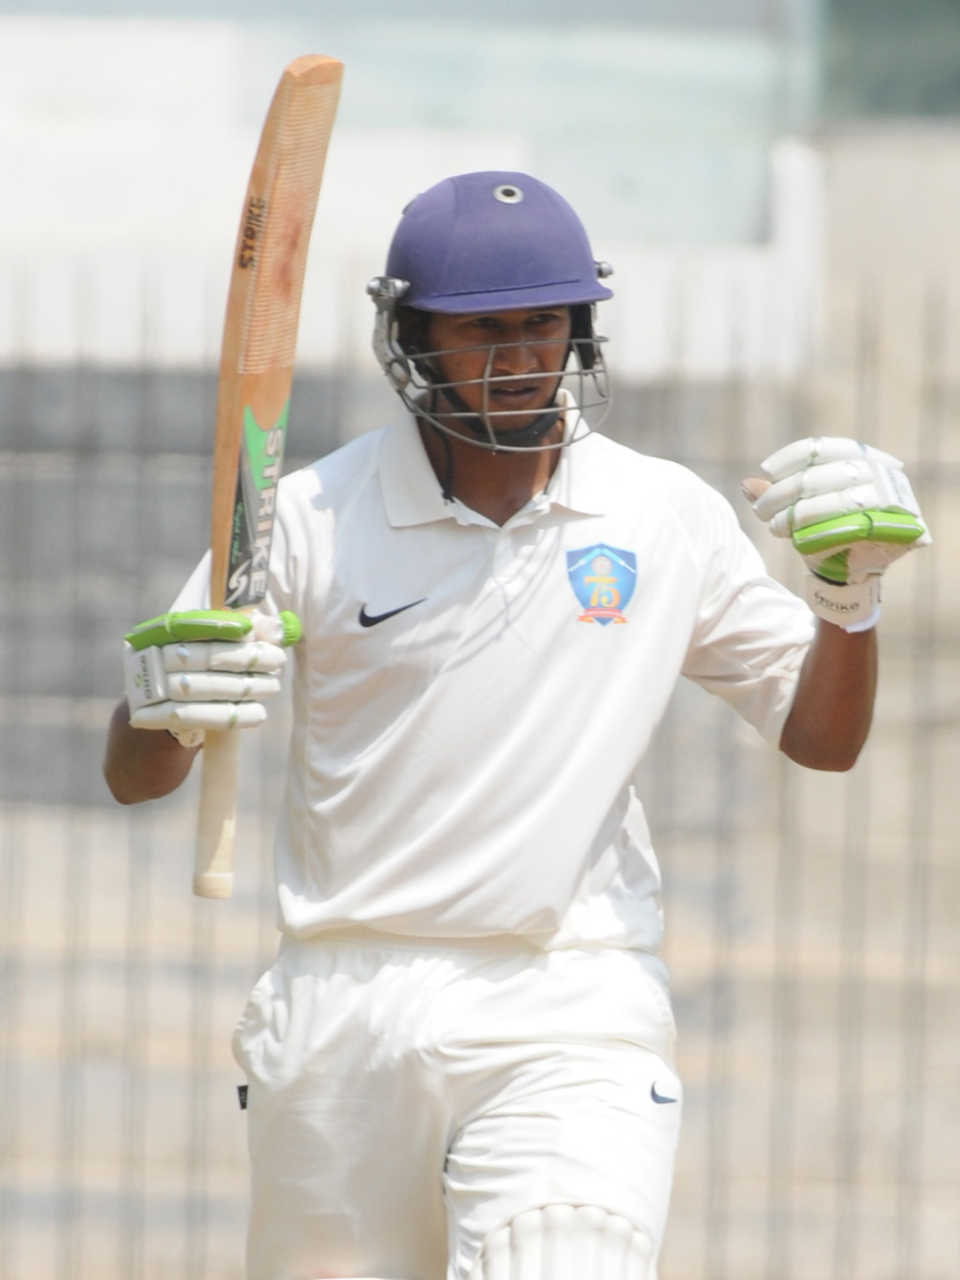 Ganesh Satish was part of a 243-run stand for the sixth wicket